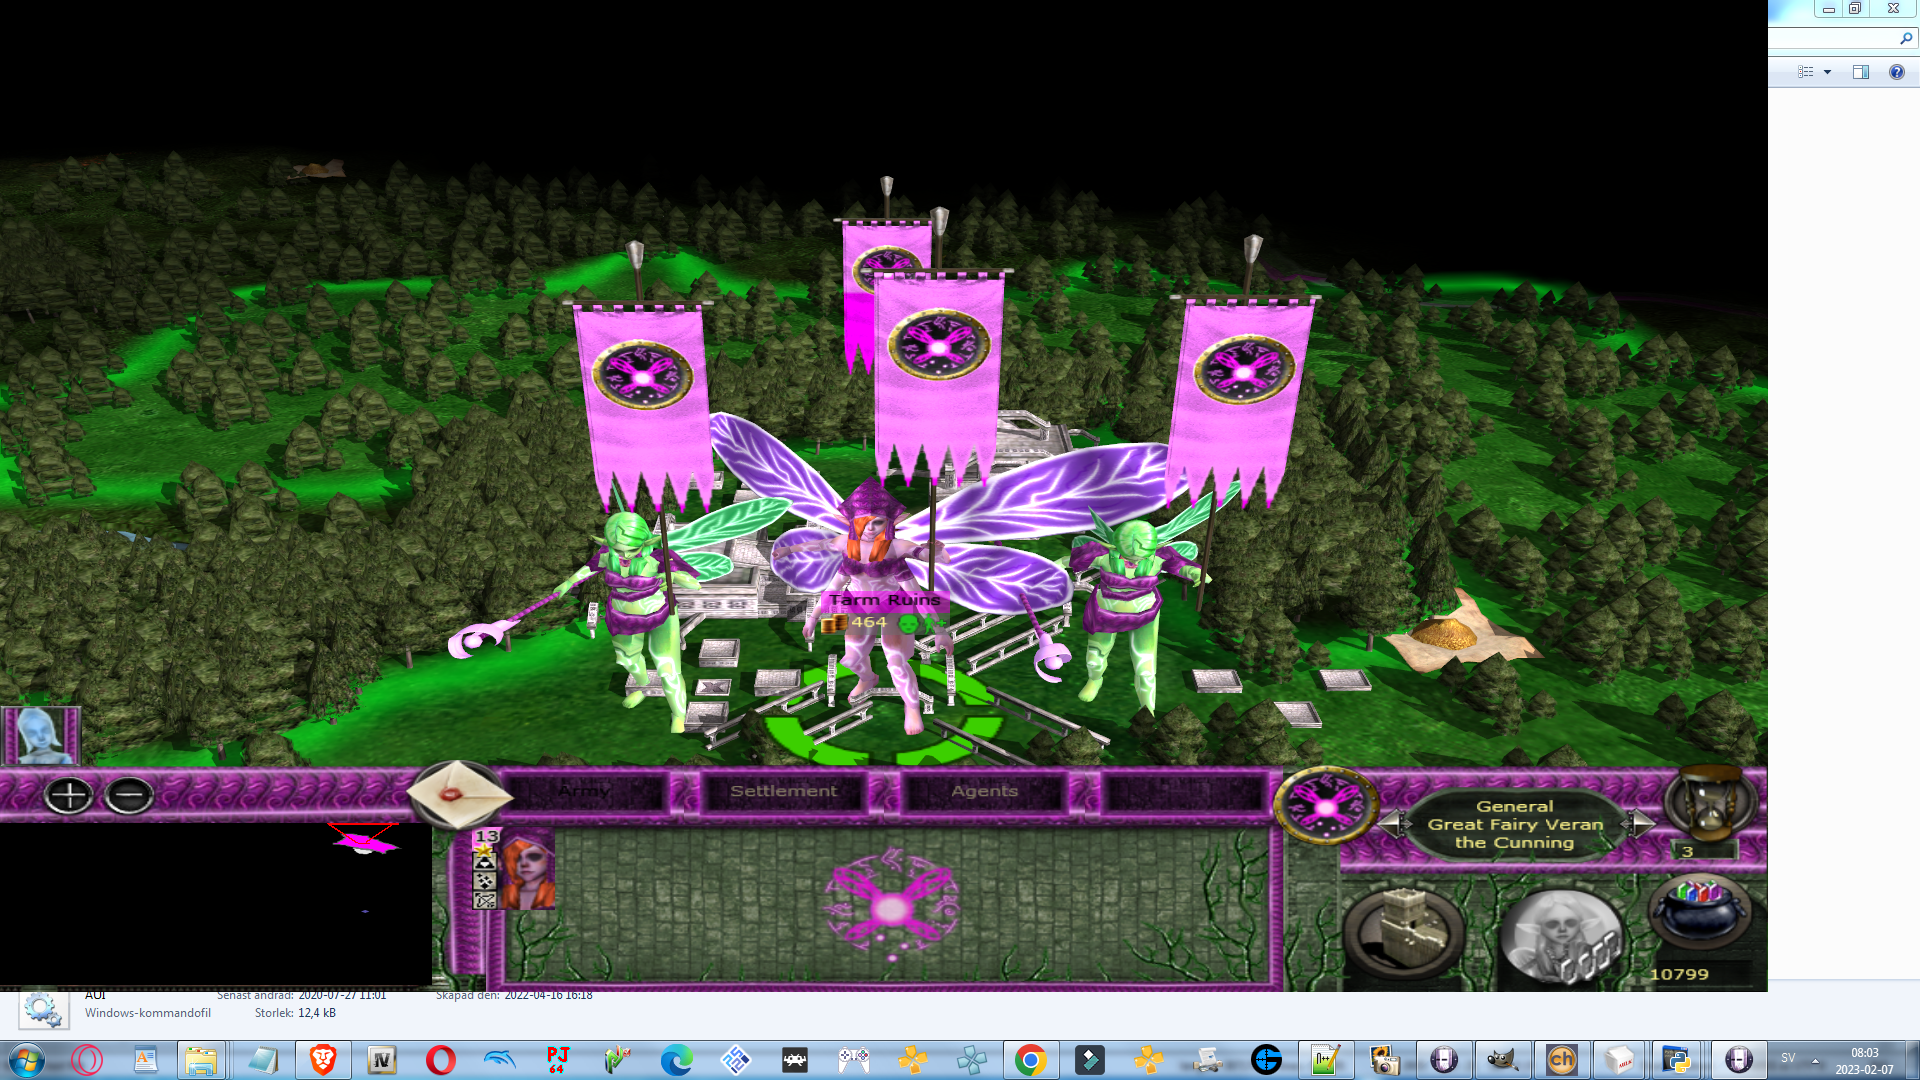 Fairy Veran finally worked! A new strat-map model Hero for the Fairies!